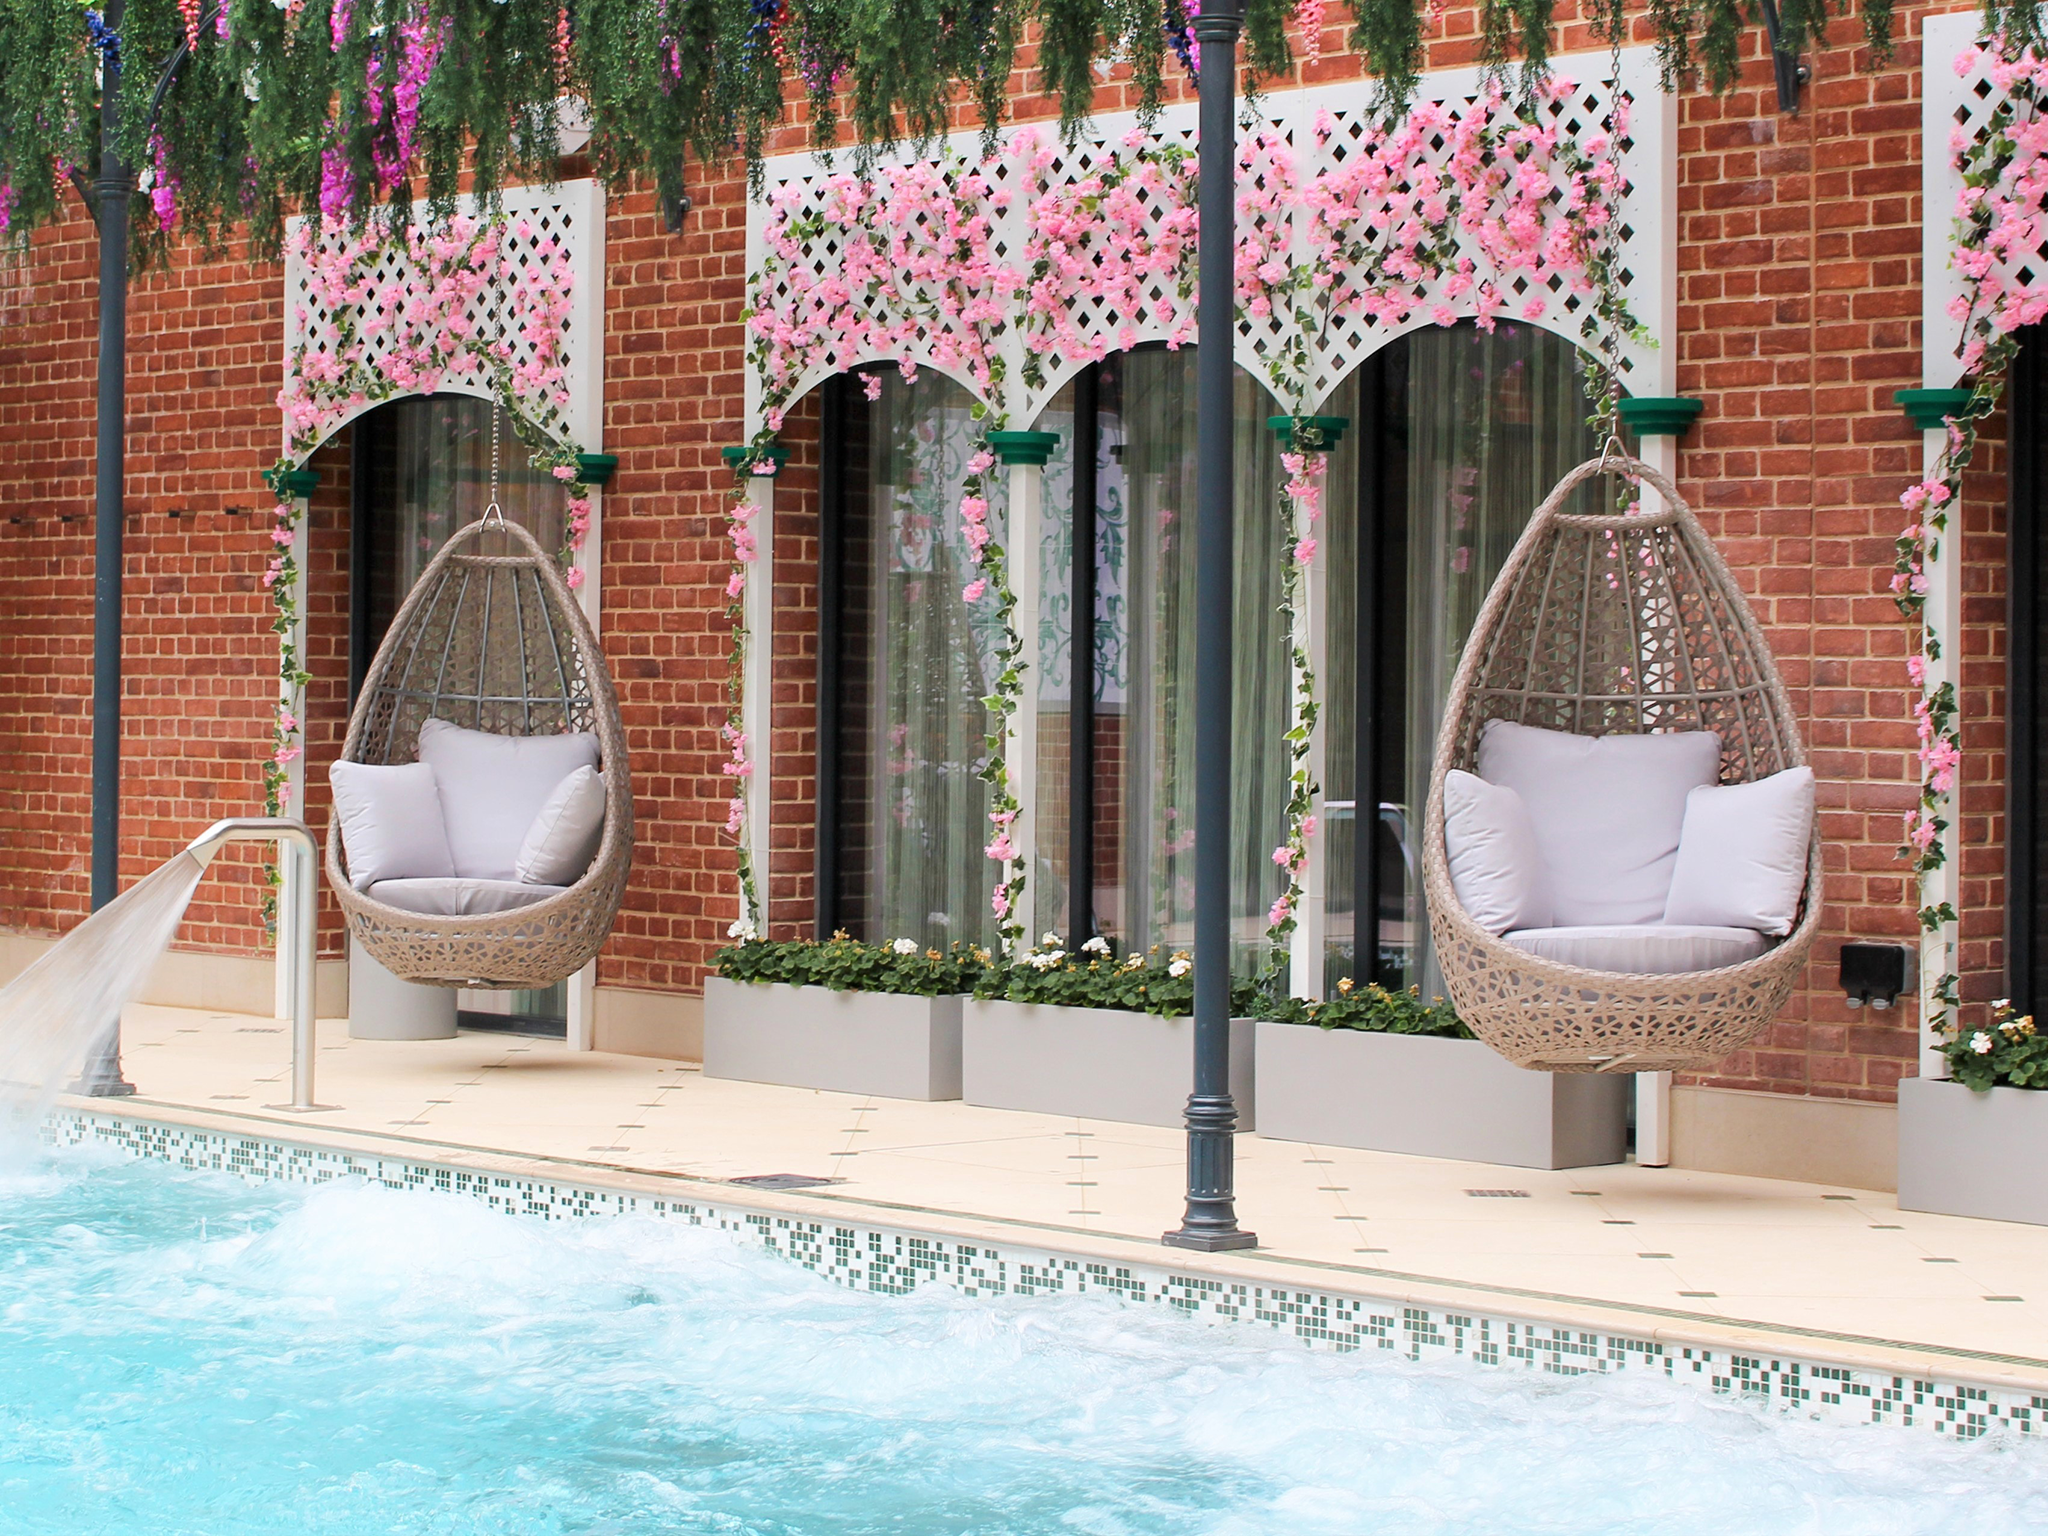 The courtyard hydro vitality pool is lovely during sunnier months